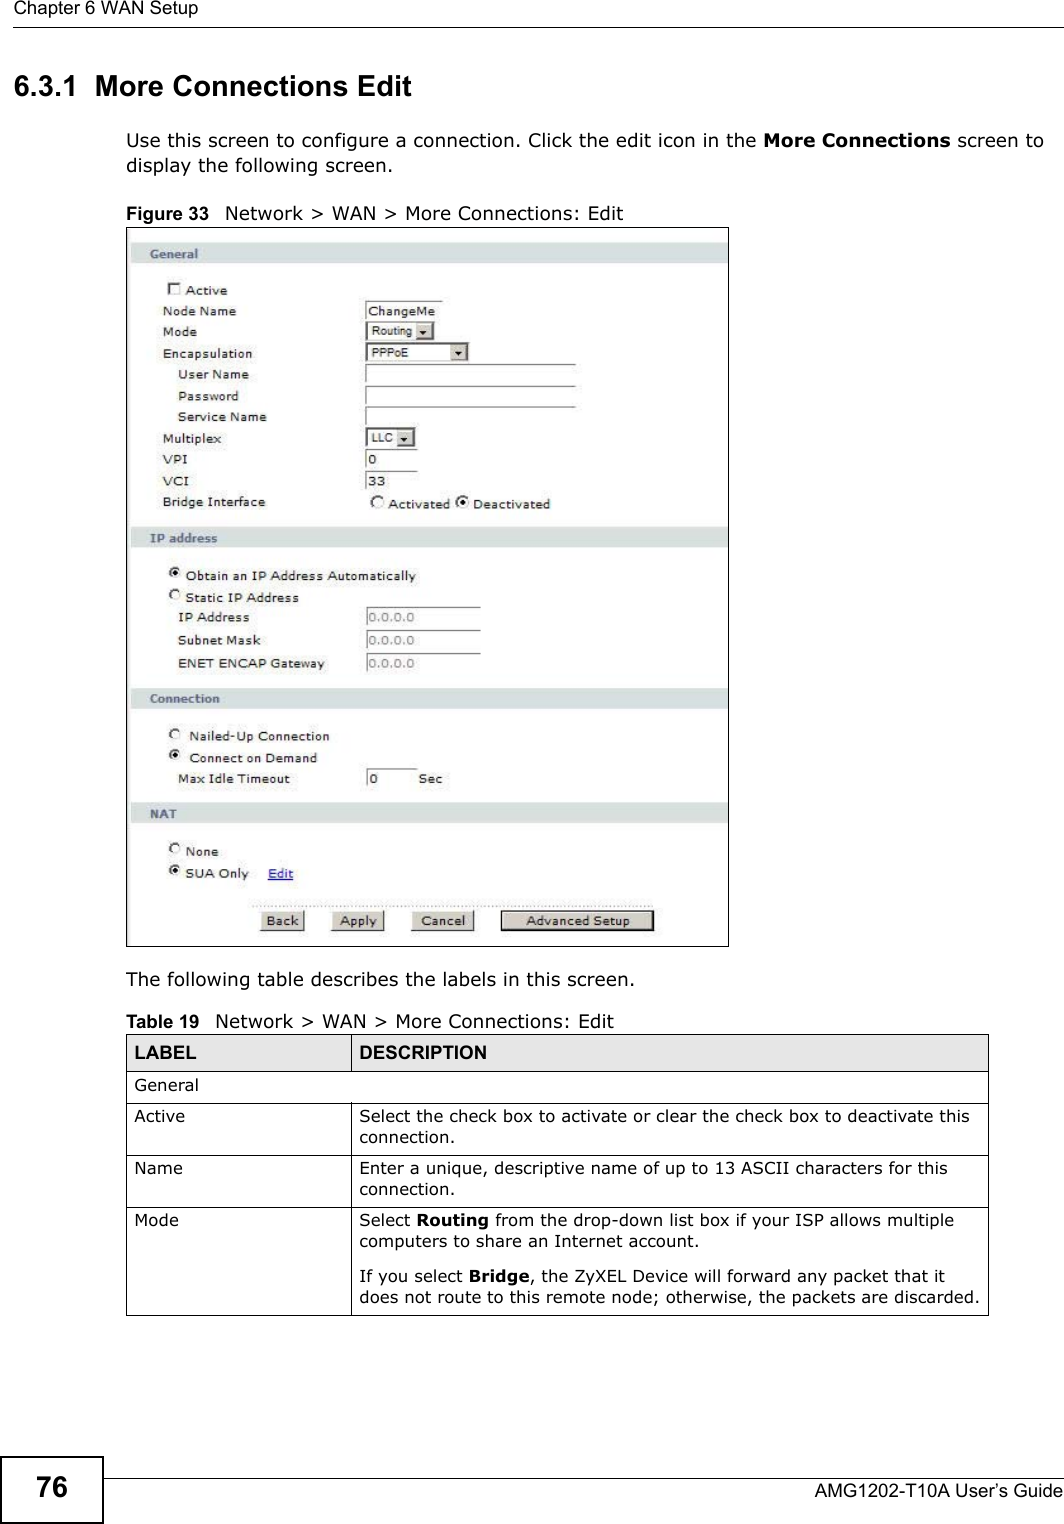 Chapter 6 WAN SetupAMG1202-T10A User’s Guide766.3.1  More Connections EditUse this screen to configure a connection. Click the edit icon in the More Connections screen to display the following screen.Figure 33   Network &gt; WAN &gt; More Connections: EditThe following table describes the labels in this screen.      Table 19   Network &gt; WAN &gt; More Connections: EditLABEL DESCRIPTIONGeneralActive Select the check box to activate or clear the check box to deactivate this connection.Name Enter a unique, descriptive name of up to 13 ASCII characters for this connection.Mode Select Routing from the drop-down list box if your ISP allows multiple computers to share an Internet account. If you select Bridge, the ZyXEL Device will forward any packet that it does not route to this remote node; otherwise, the packets are discarded.